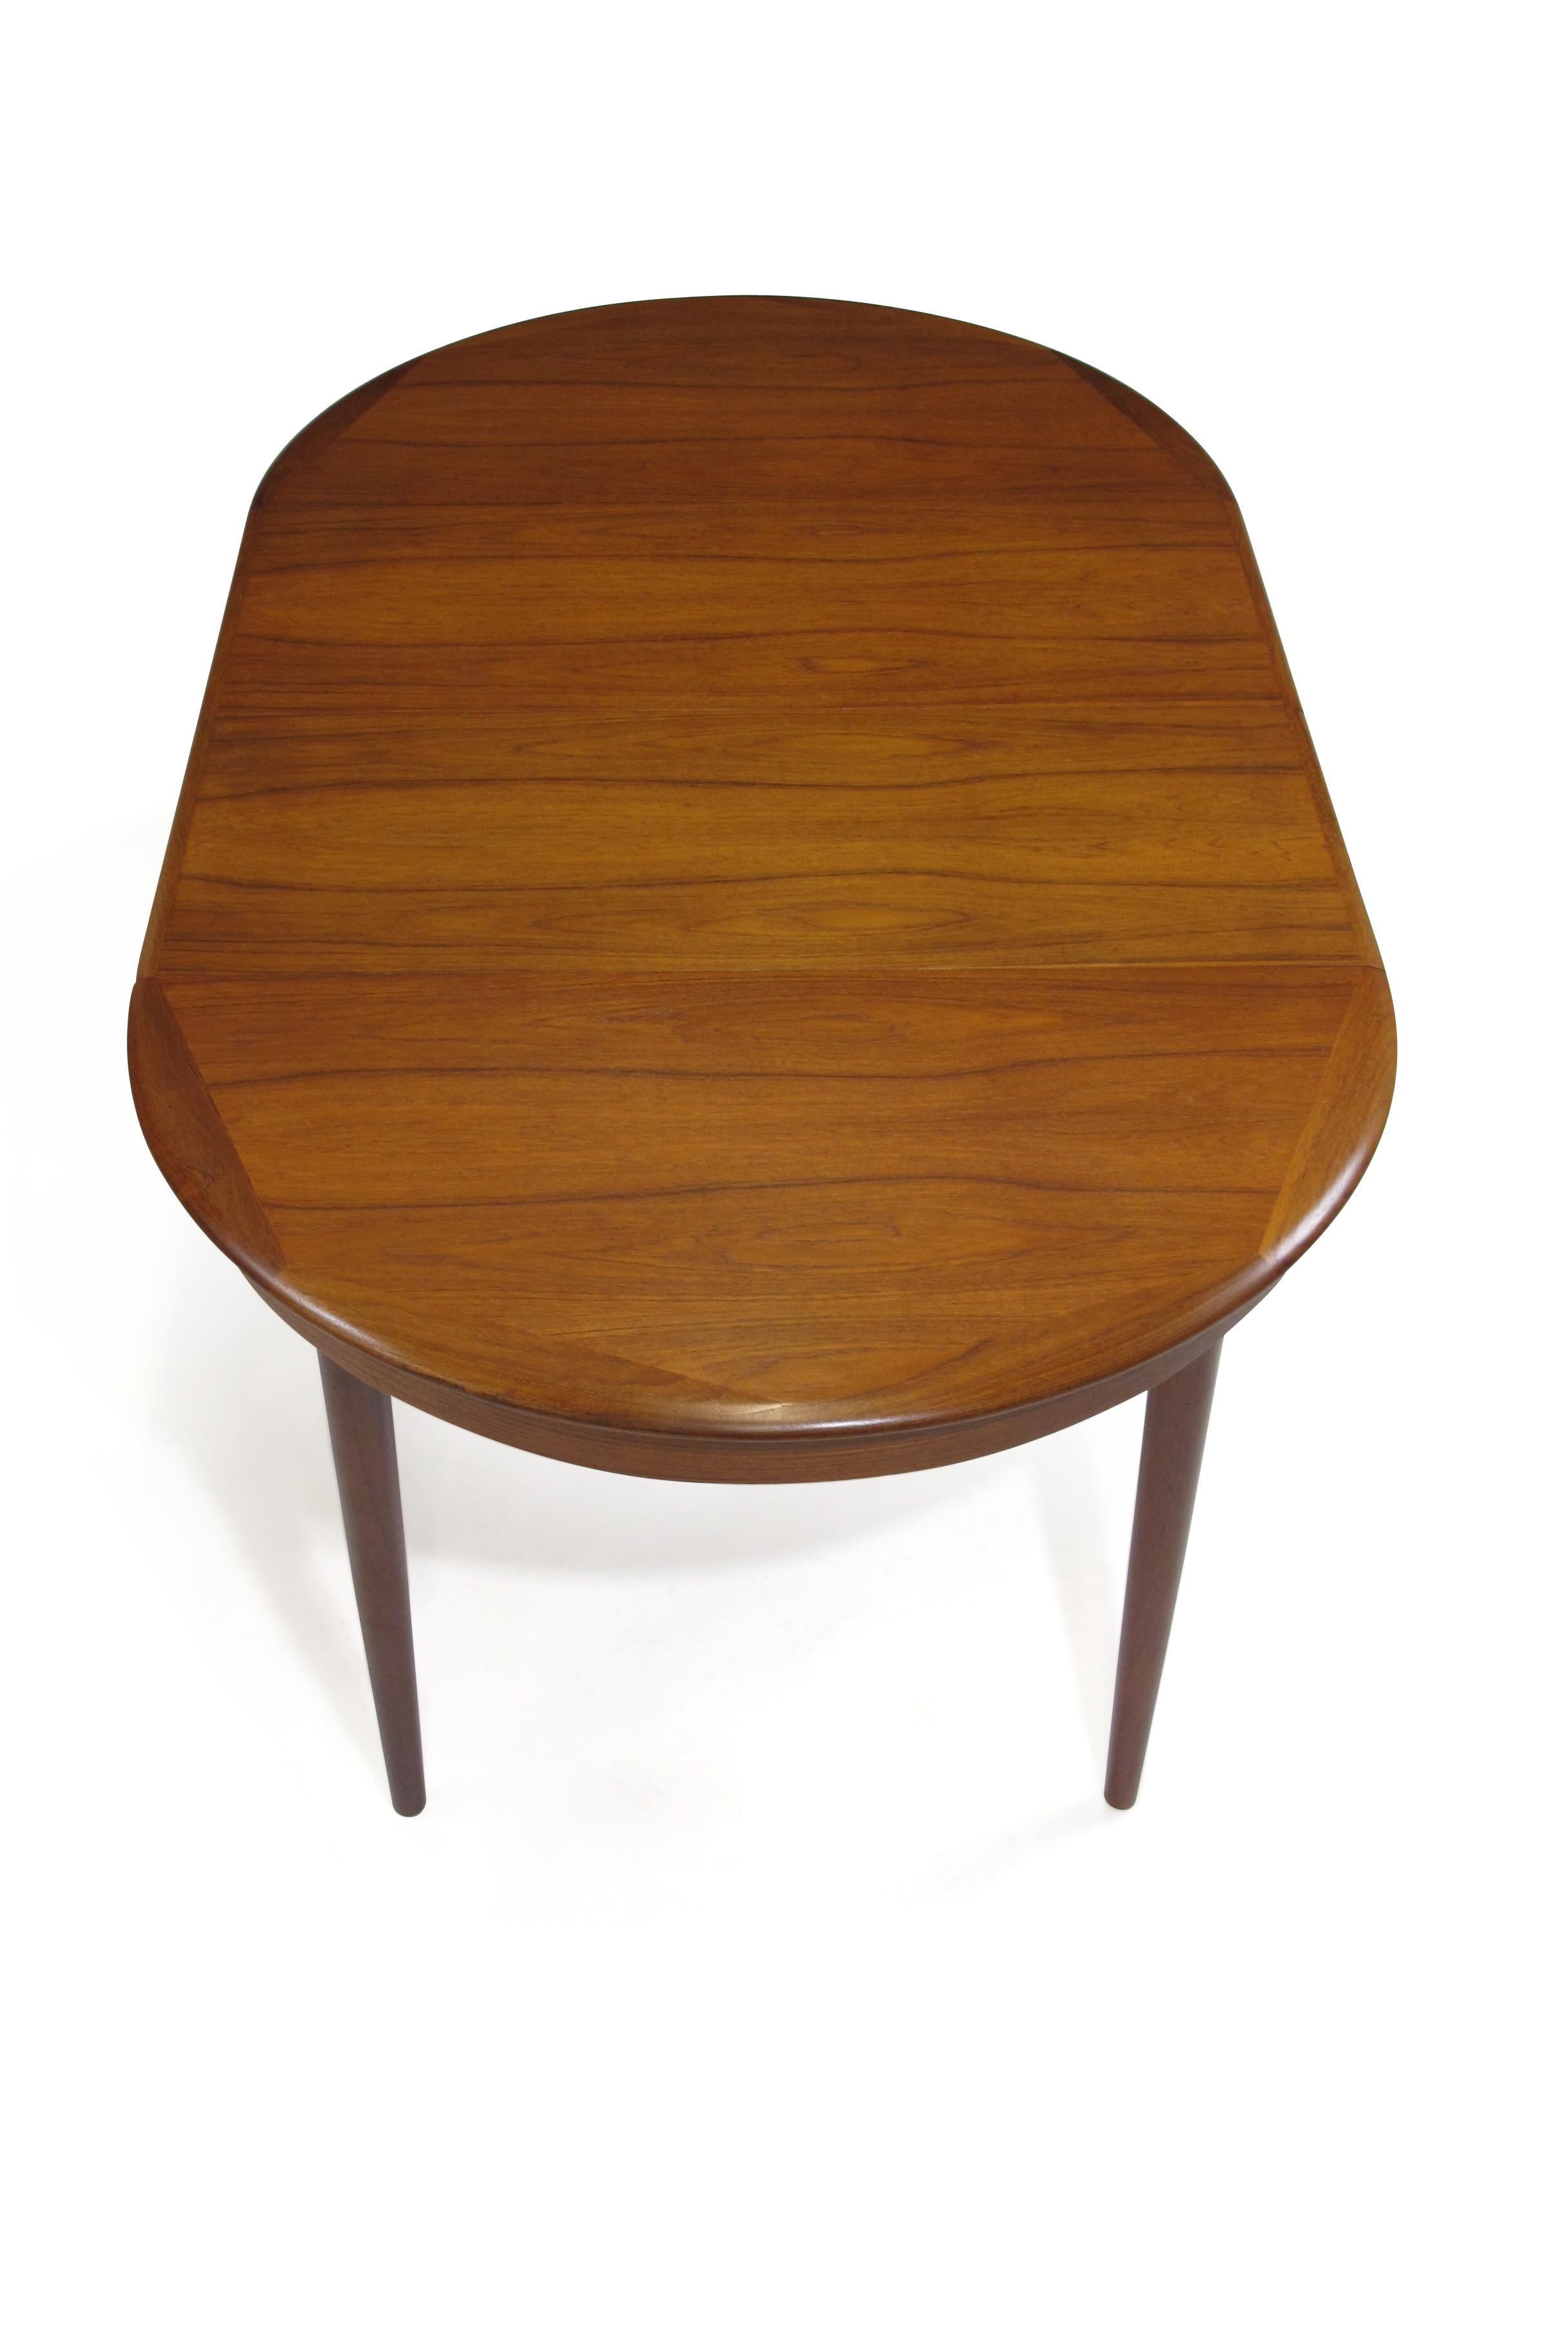 Midcentury Round Danish Teak Dining Table, Seats 4-10 Guests 2